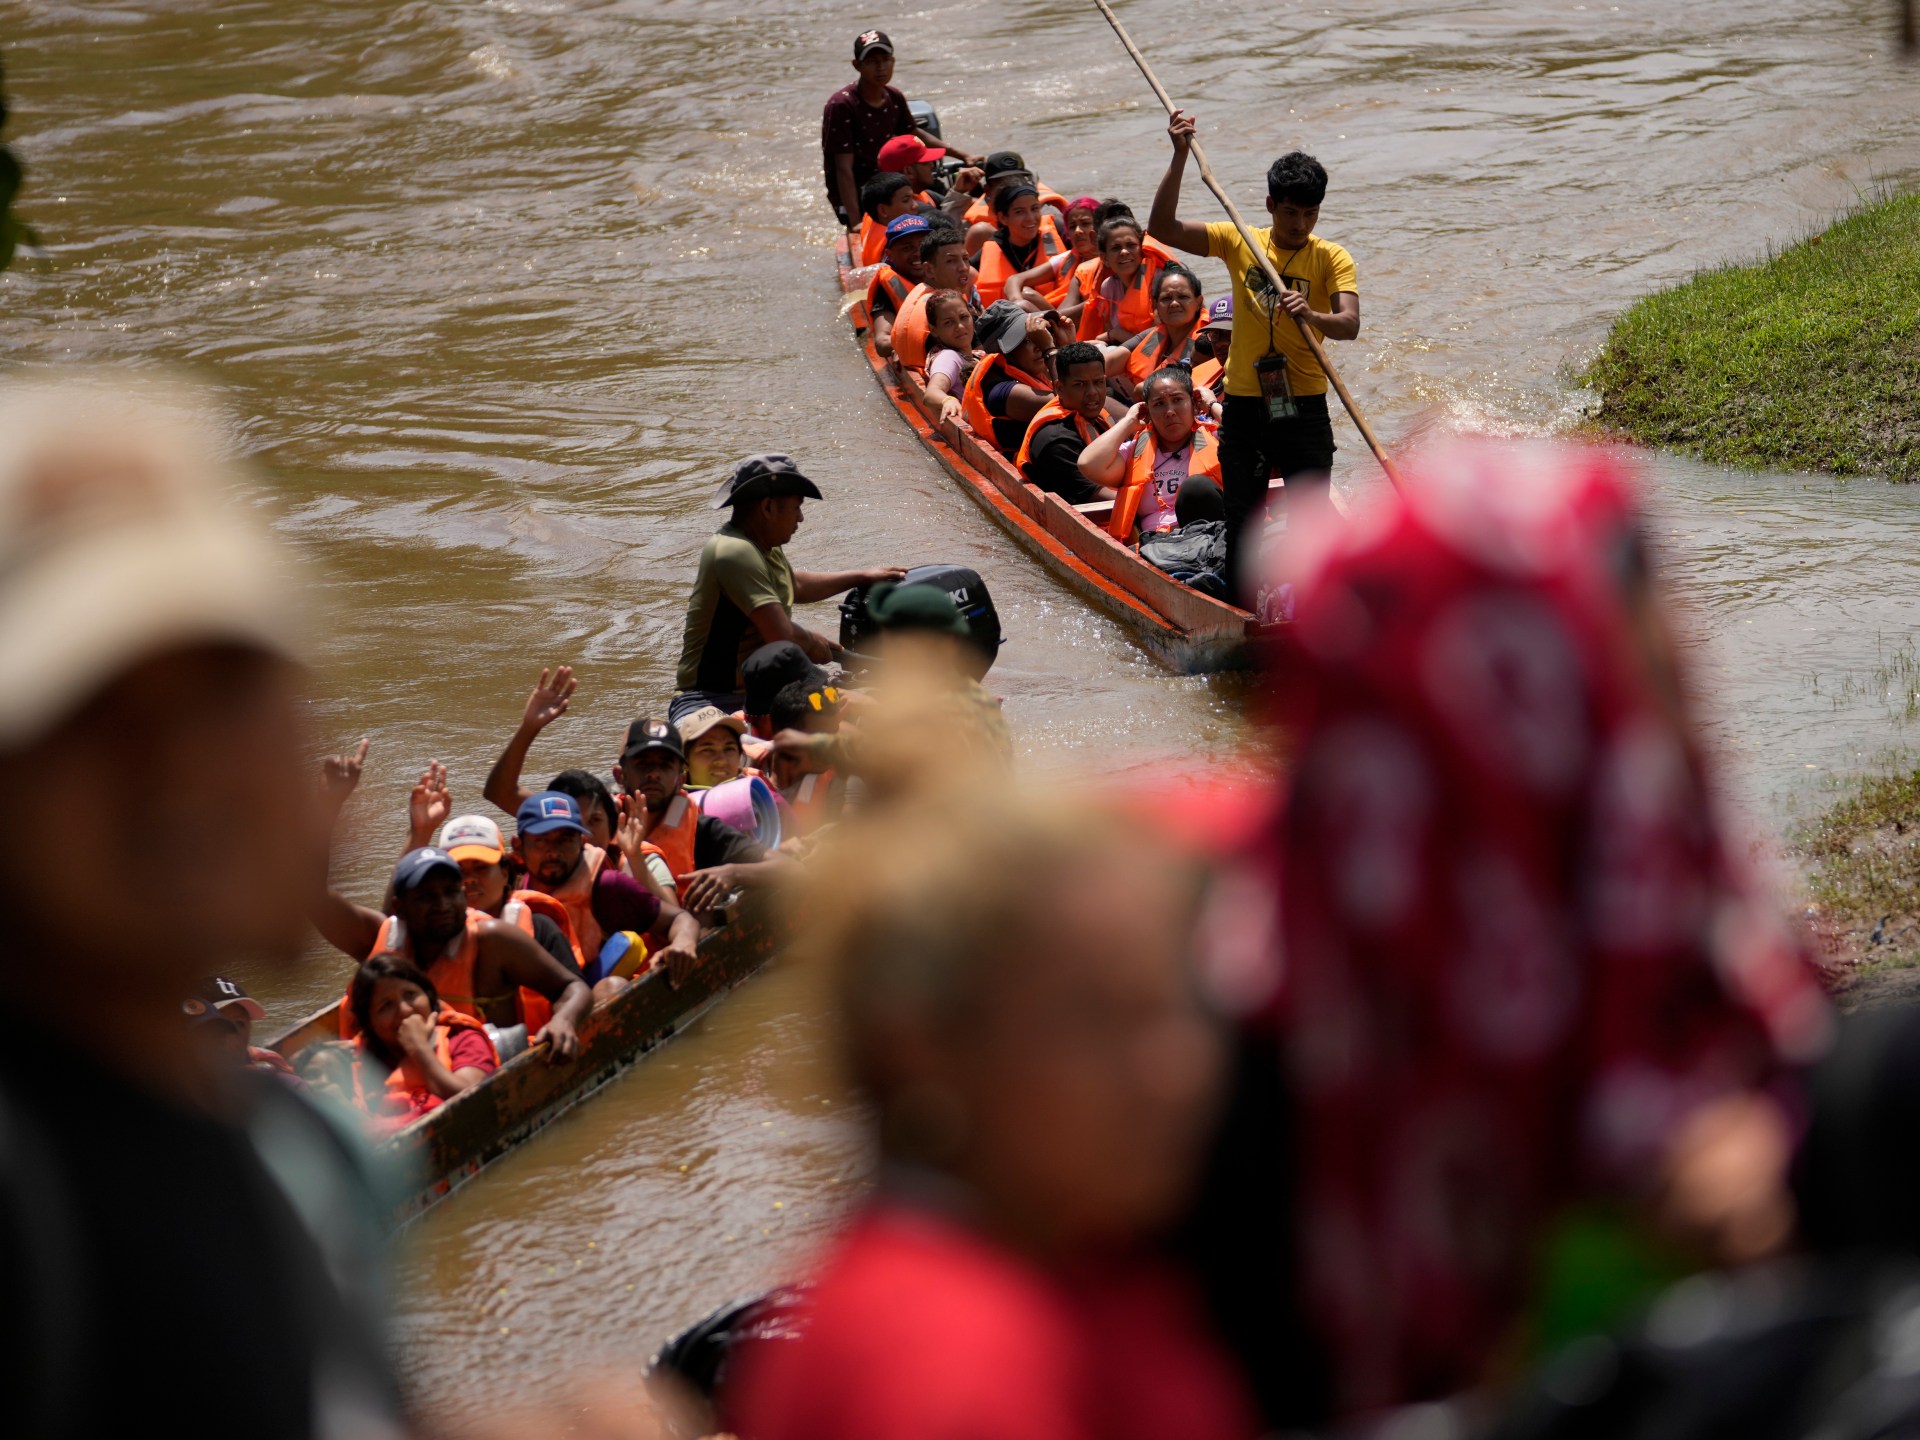 Ten people drown in Panama river as migration risks escalate | Migration News